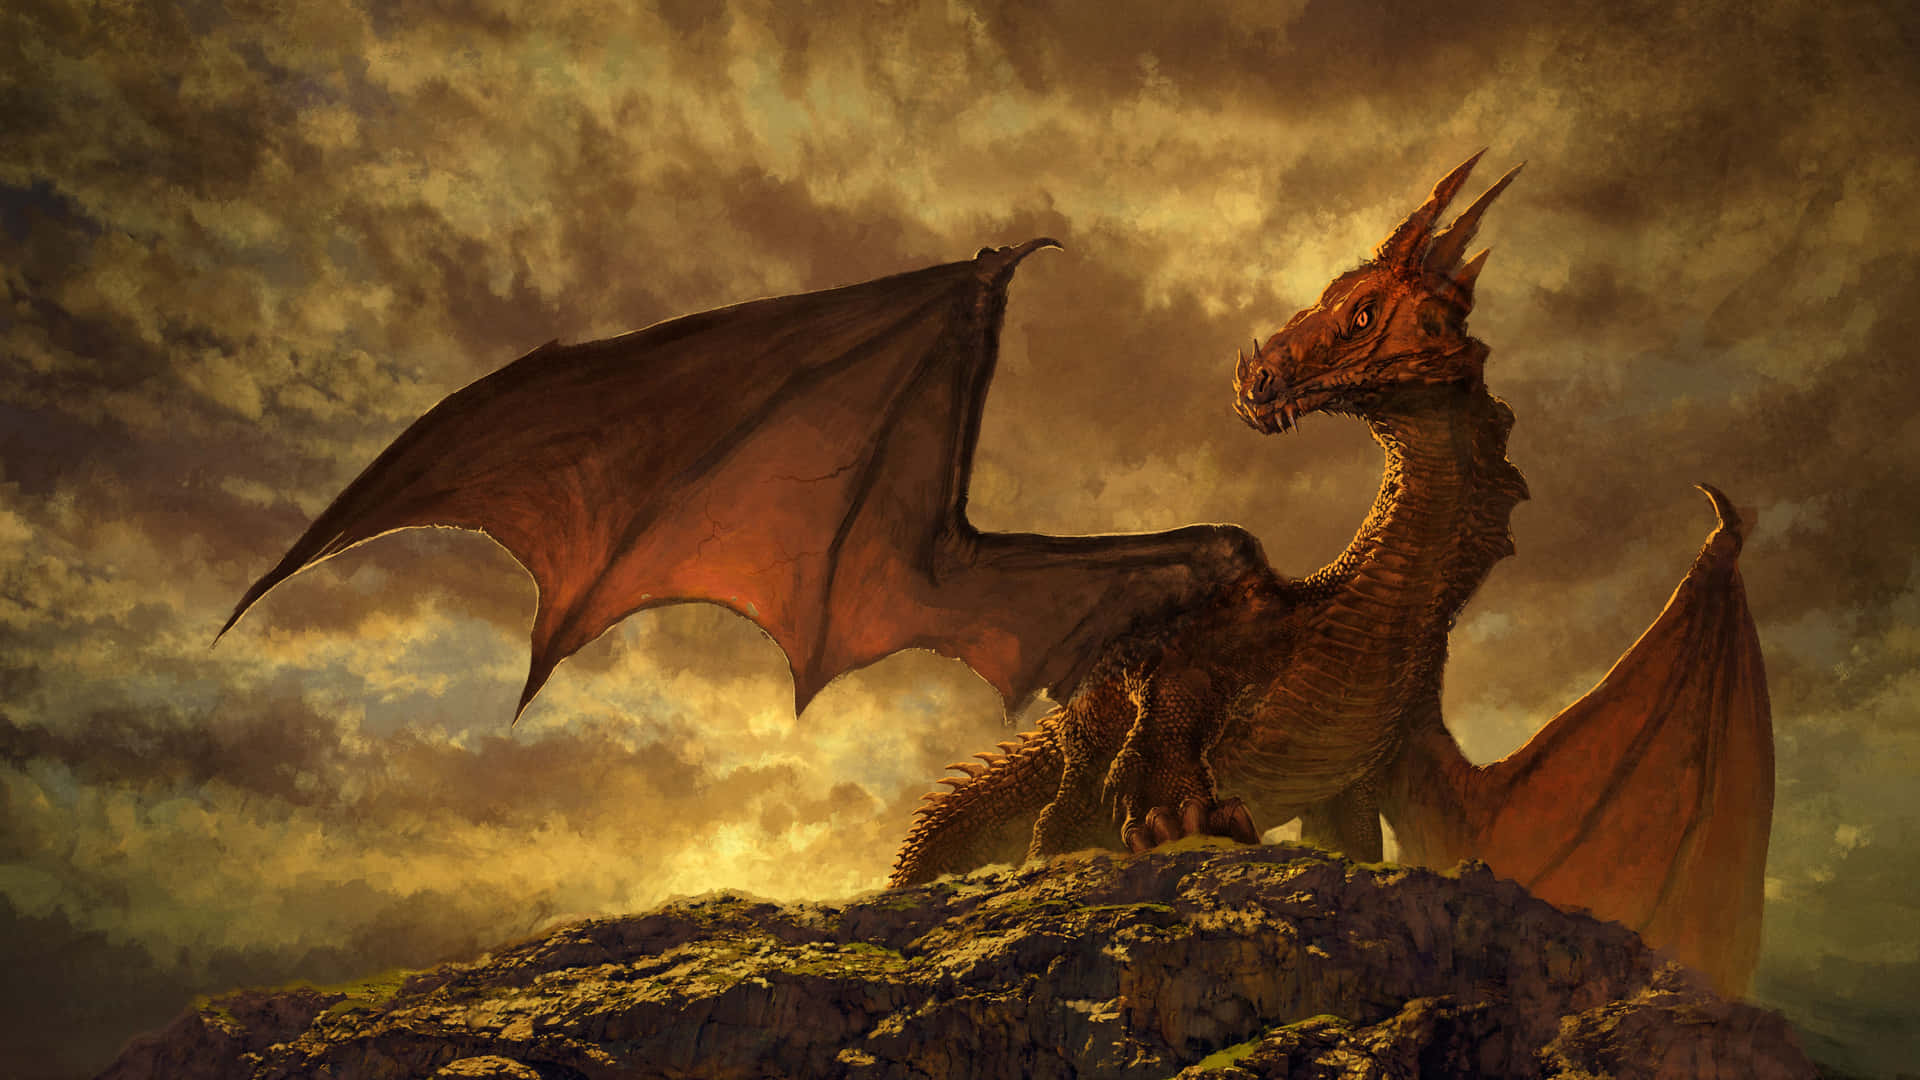 "A mystical dragon soars through the sky, its scales glistening in the sun." Wallpaper